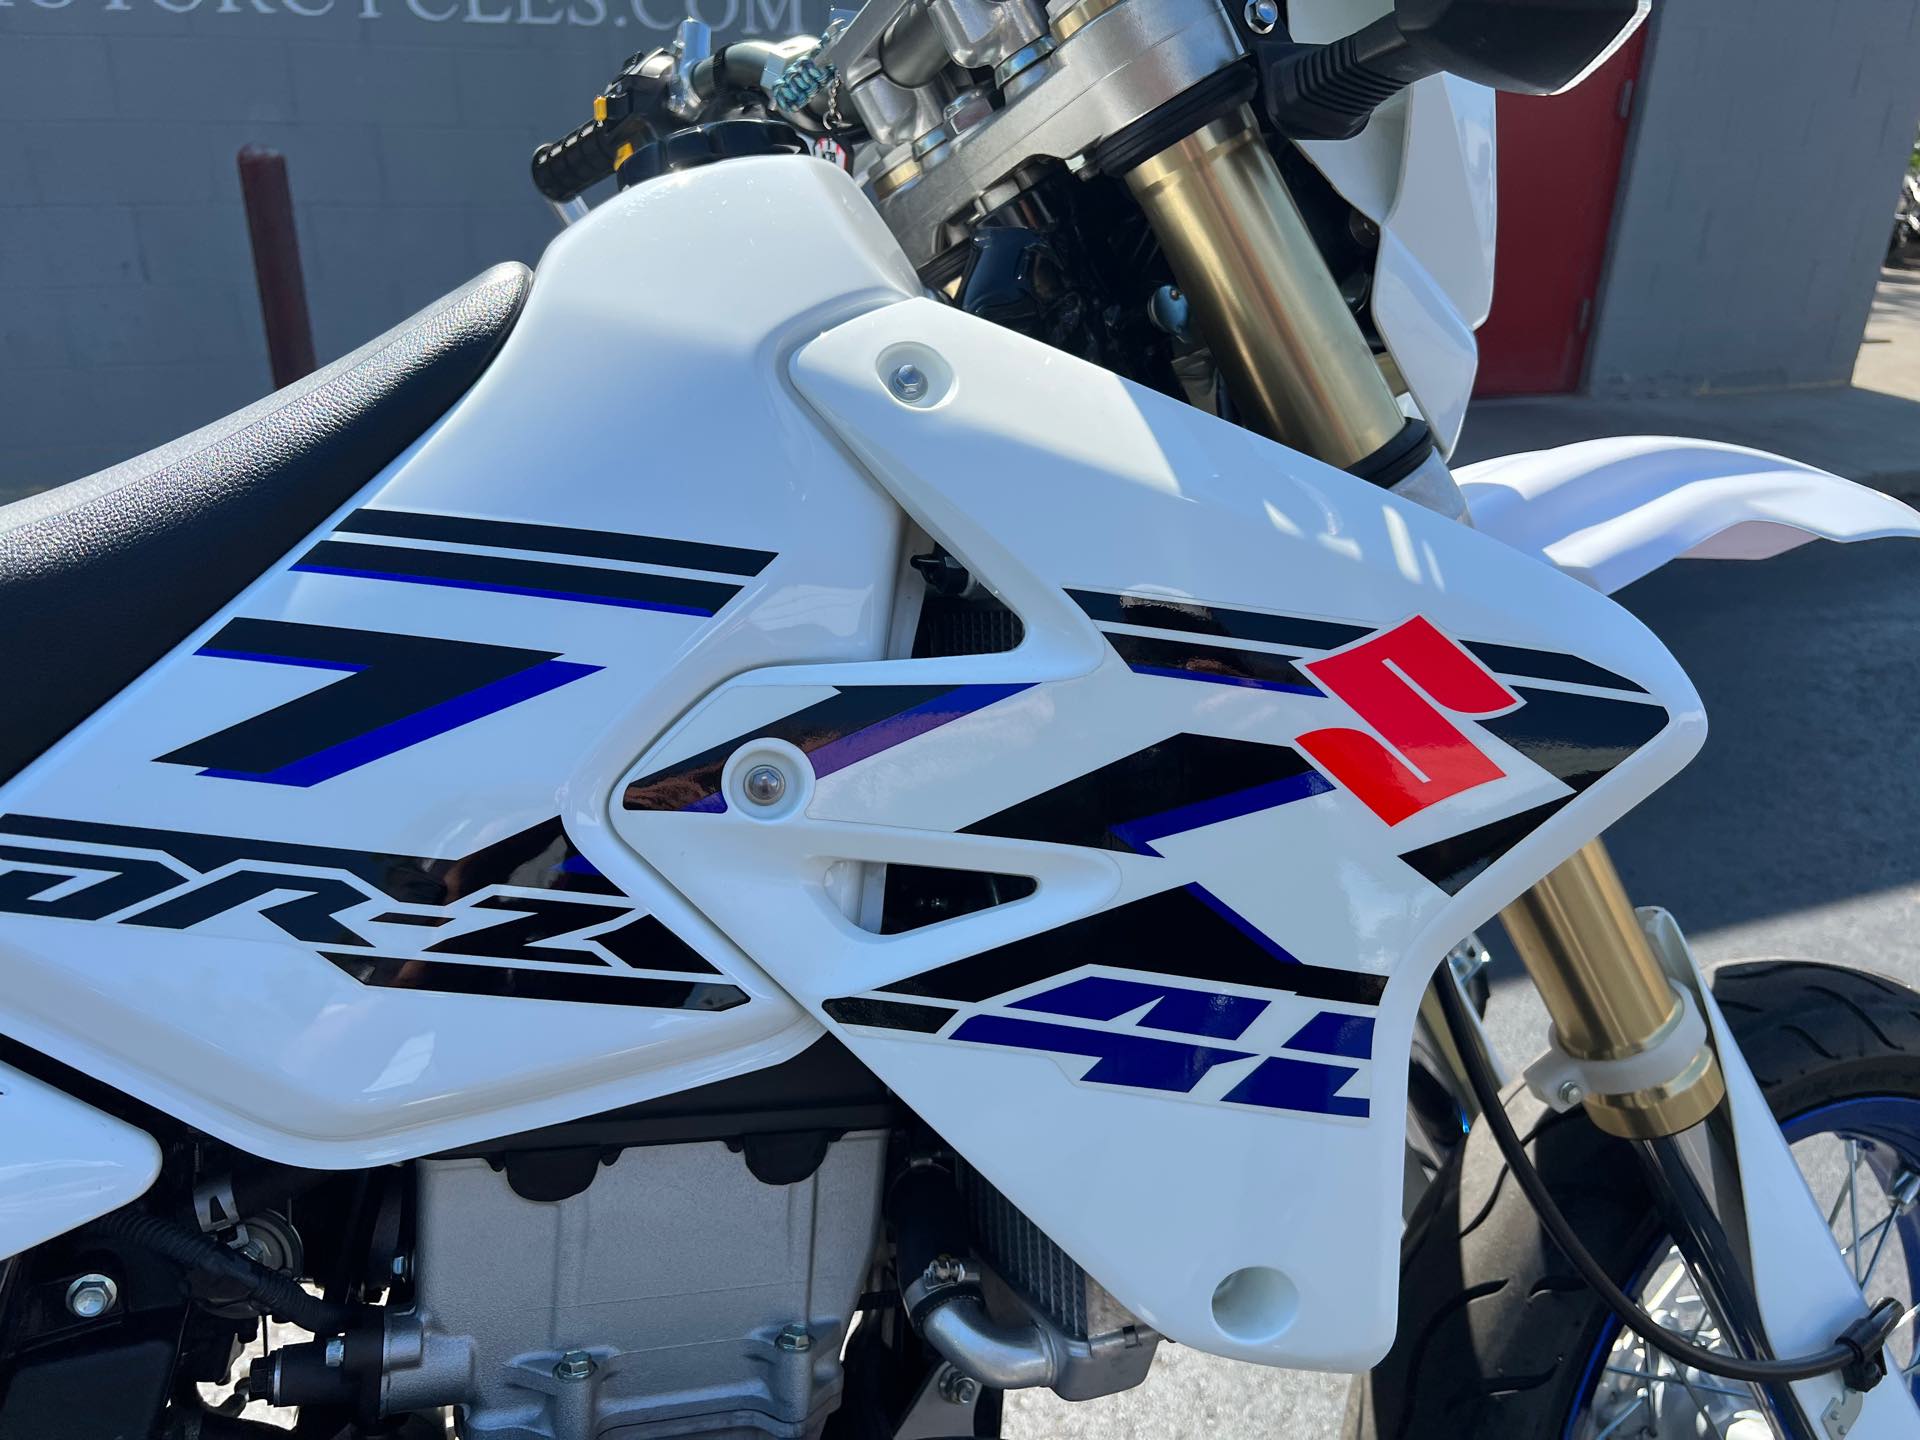 2017 Suzuki DR-Z 400SM Base at Aces Motorcycles - Fort Collins